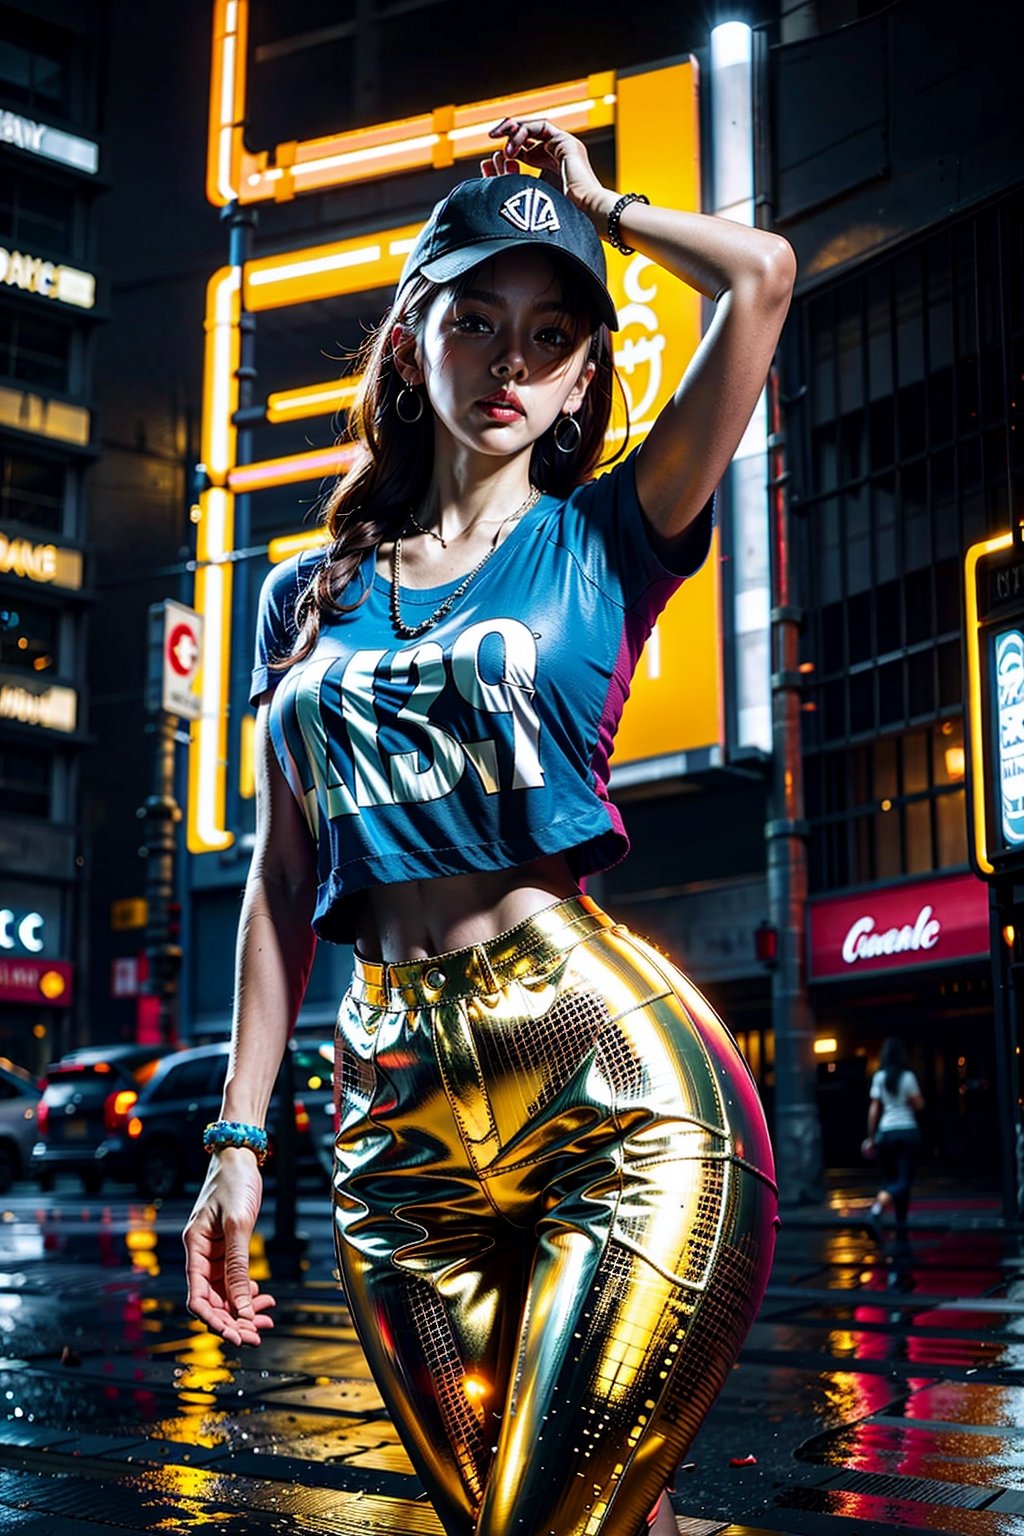 Masterpiece, ultra high resolution, outrageous,
A woman in her 20s wearing (Ball cap, printed cropped t-shirt and sweatpants), sophisticated fashion. Shiny long hair blowing in the wind, wearing small earrings, simple necklace and bracelet, city background, ((dynamic pose looking at the viewer)), Dutch angle, ((Big breasts:1.15)), ((big hips:1.05)), ((narrow waist:1.1)),Night view, street, neon sign, downtown,midnight,blurry_light_background